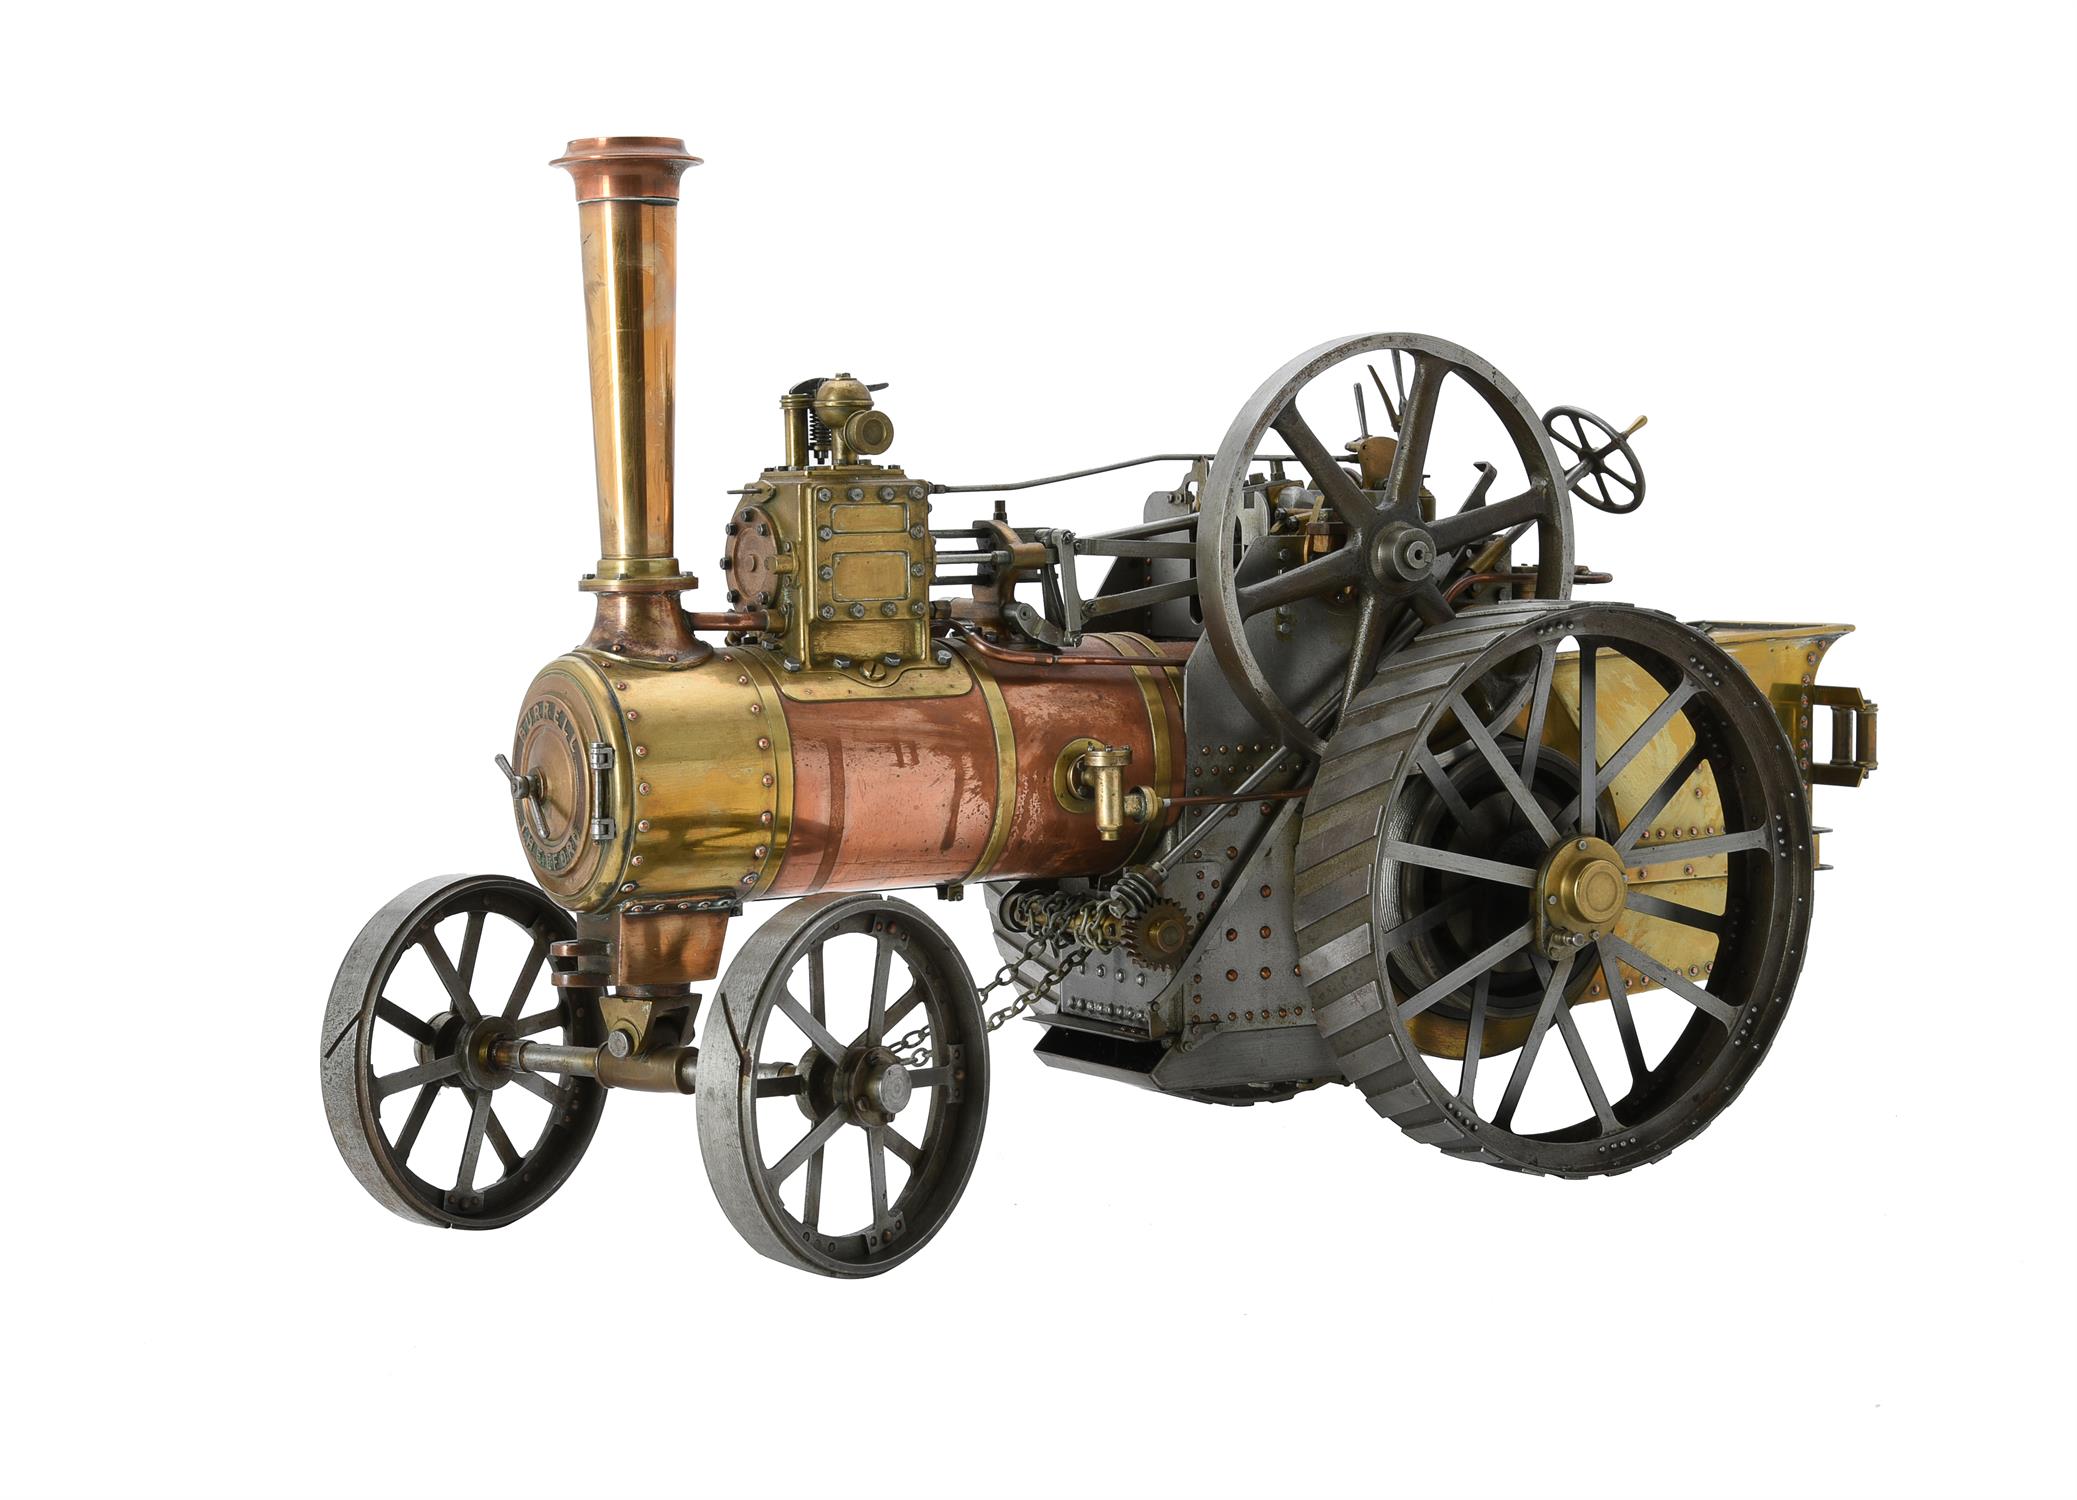 A well engineered 1 1/2 inch scale model of a Burrell agricultural traction engine